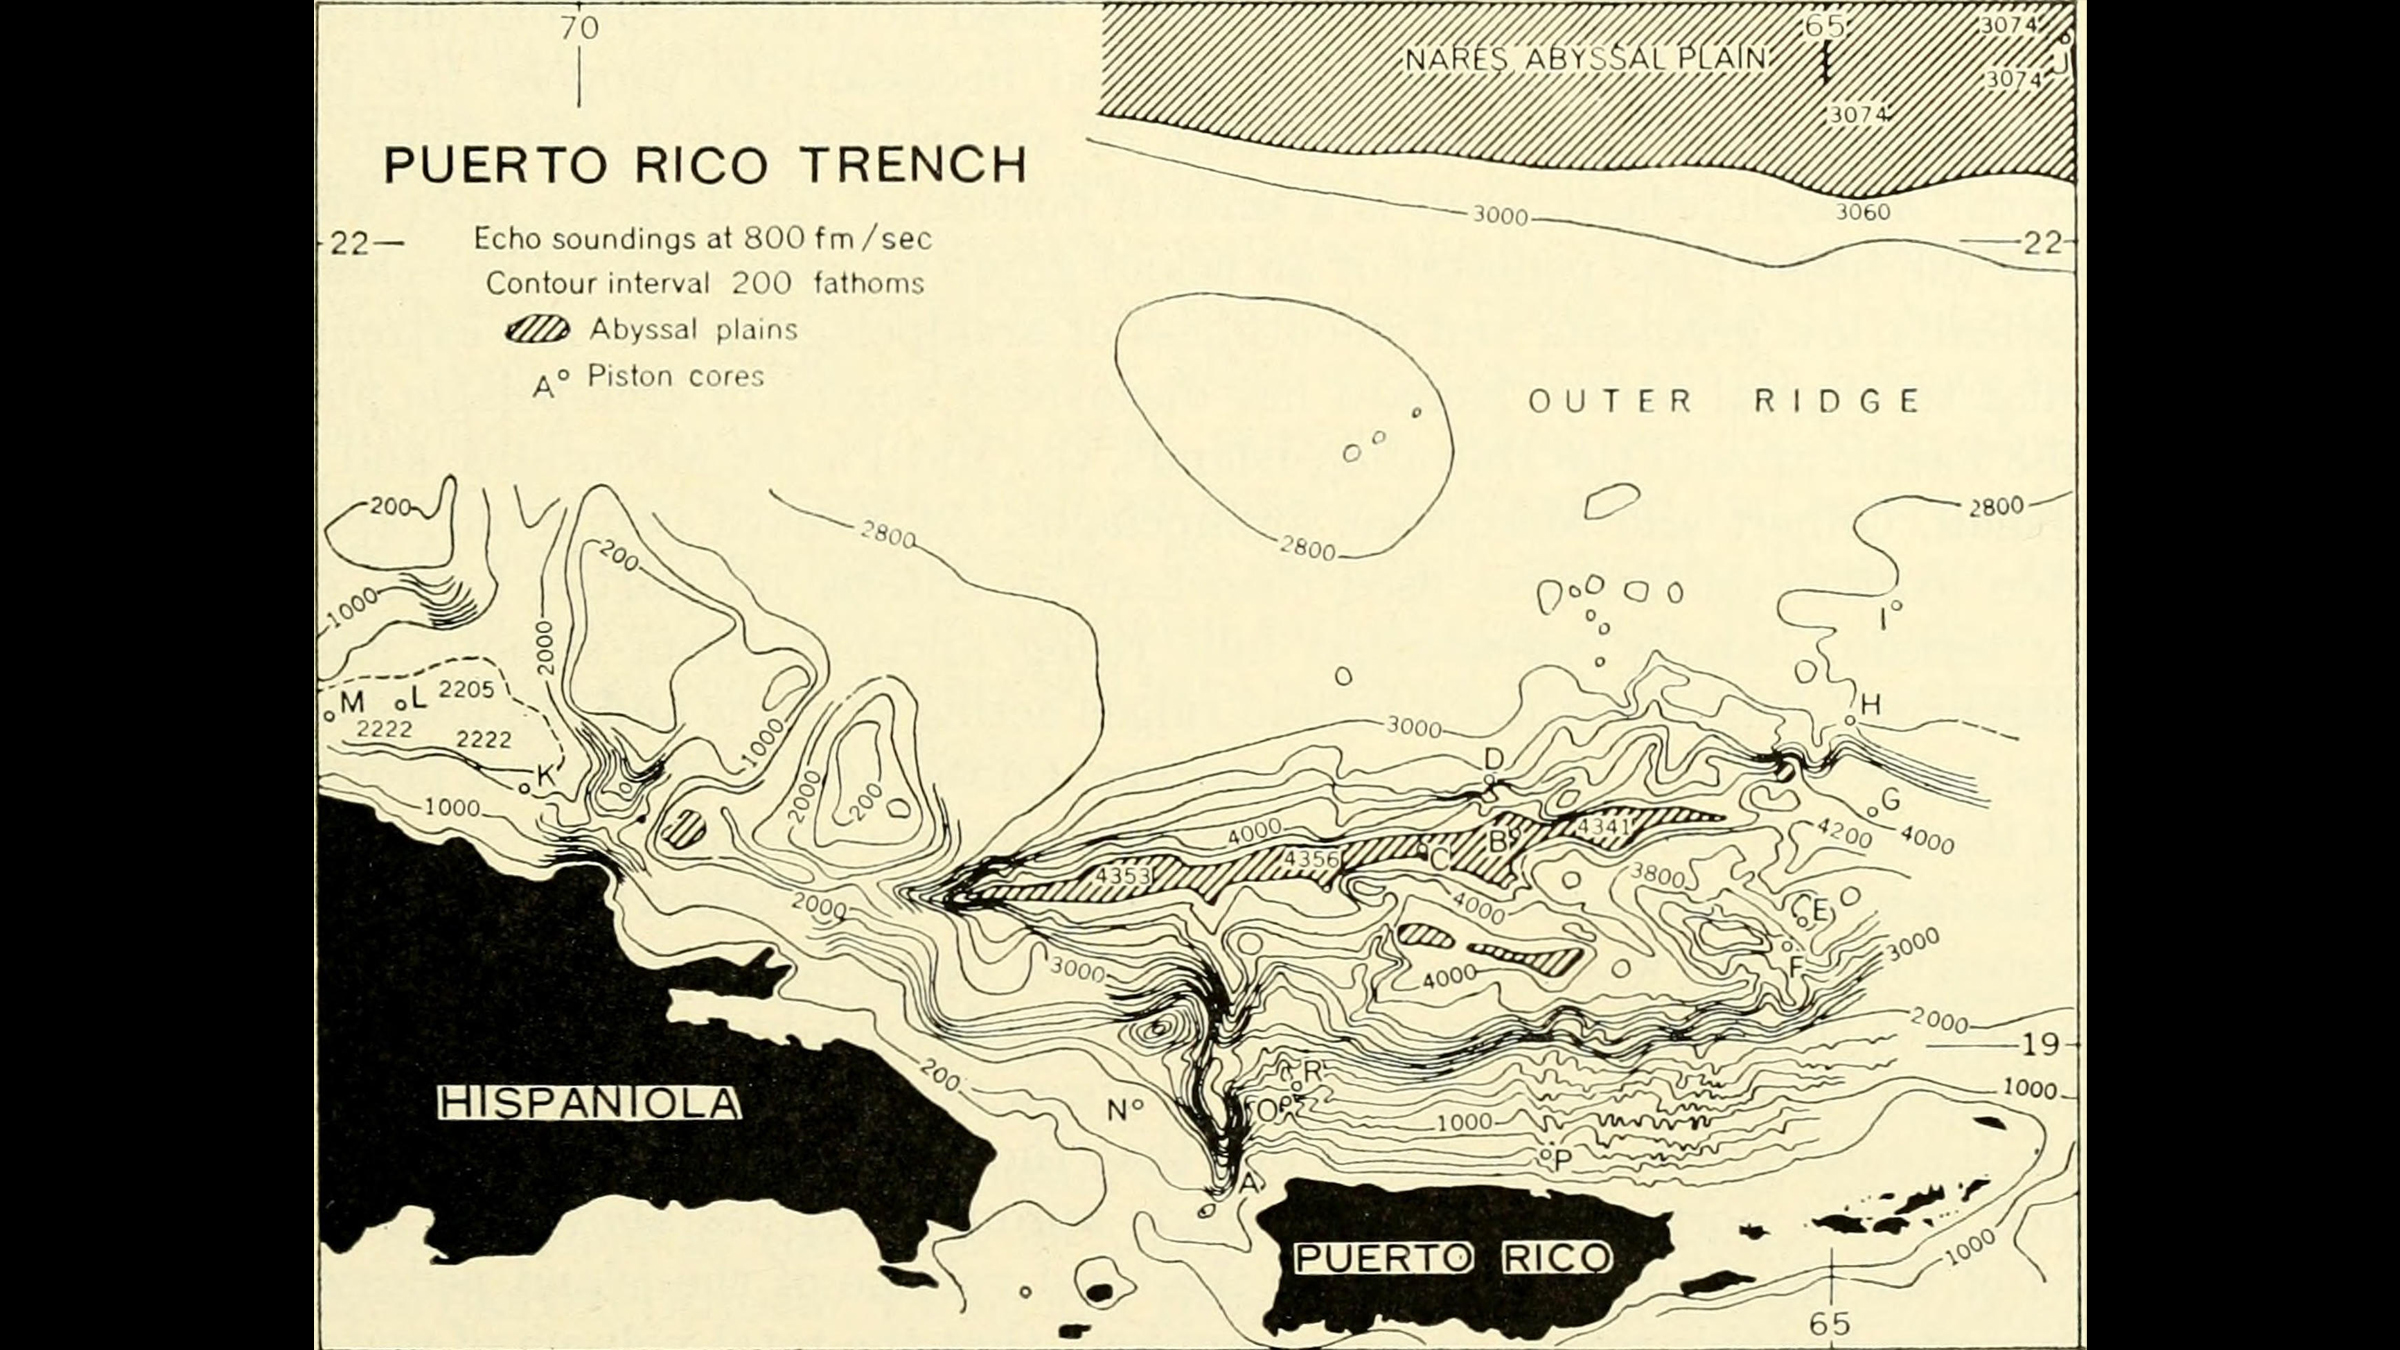 A map showing the topography of the Puerto Rico Trench.